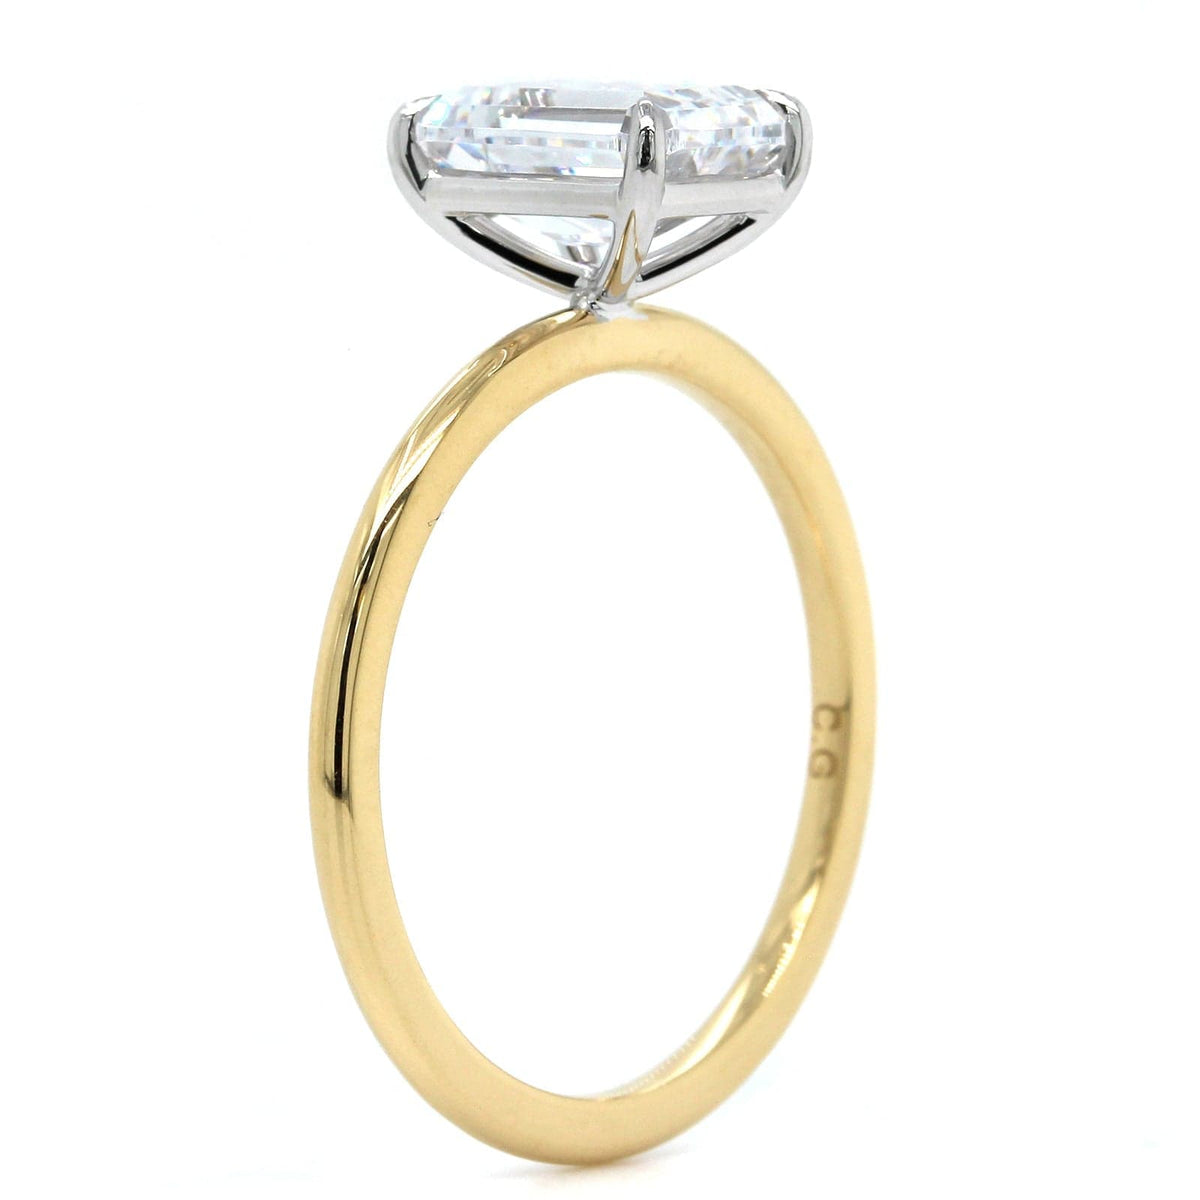 18K Yellow Gold Emerald 4 Prong Solitaire Engagement Ring Setting, 18k yellow gold and platinum, Long's Jewelers